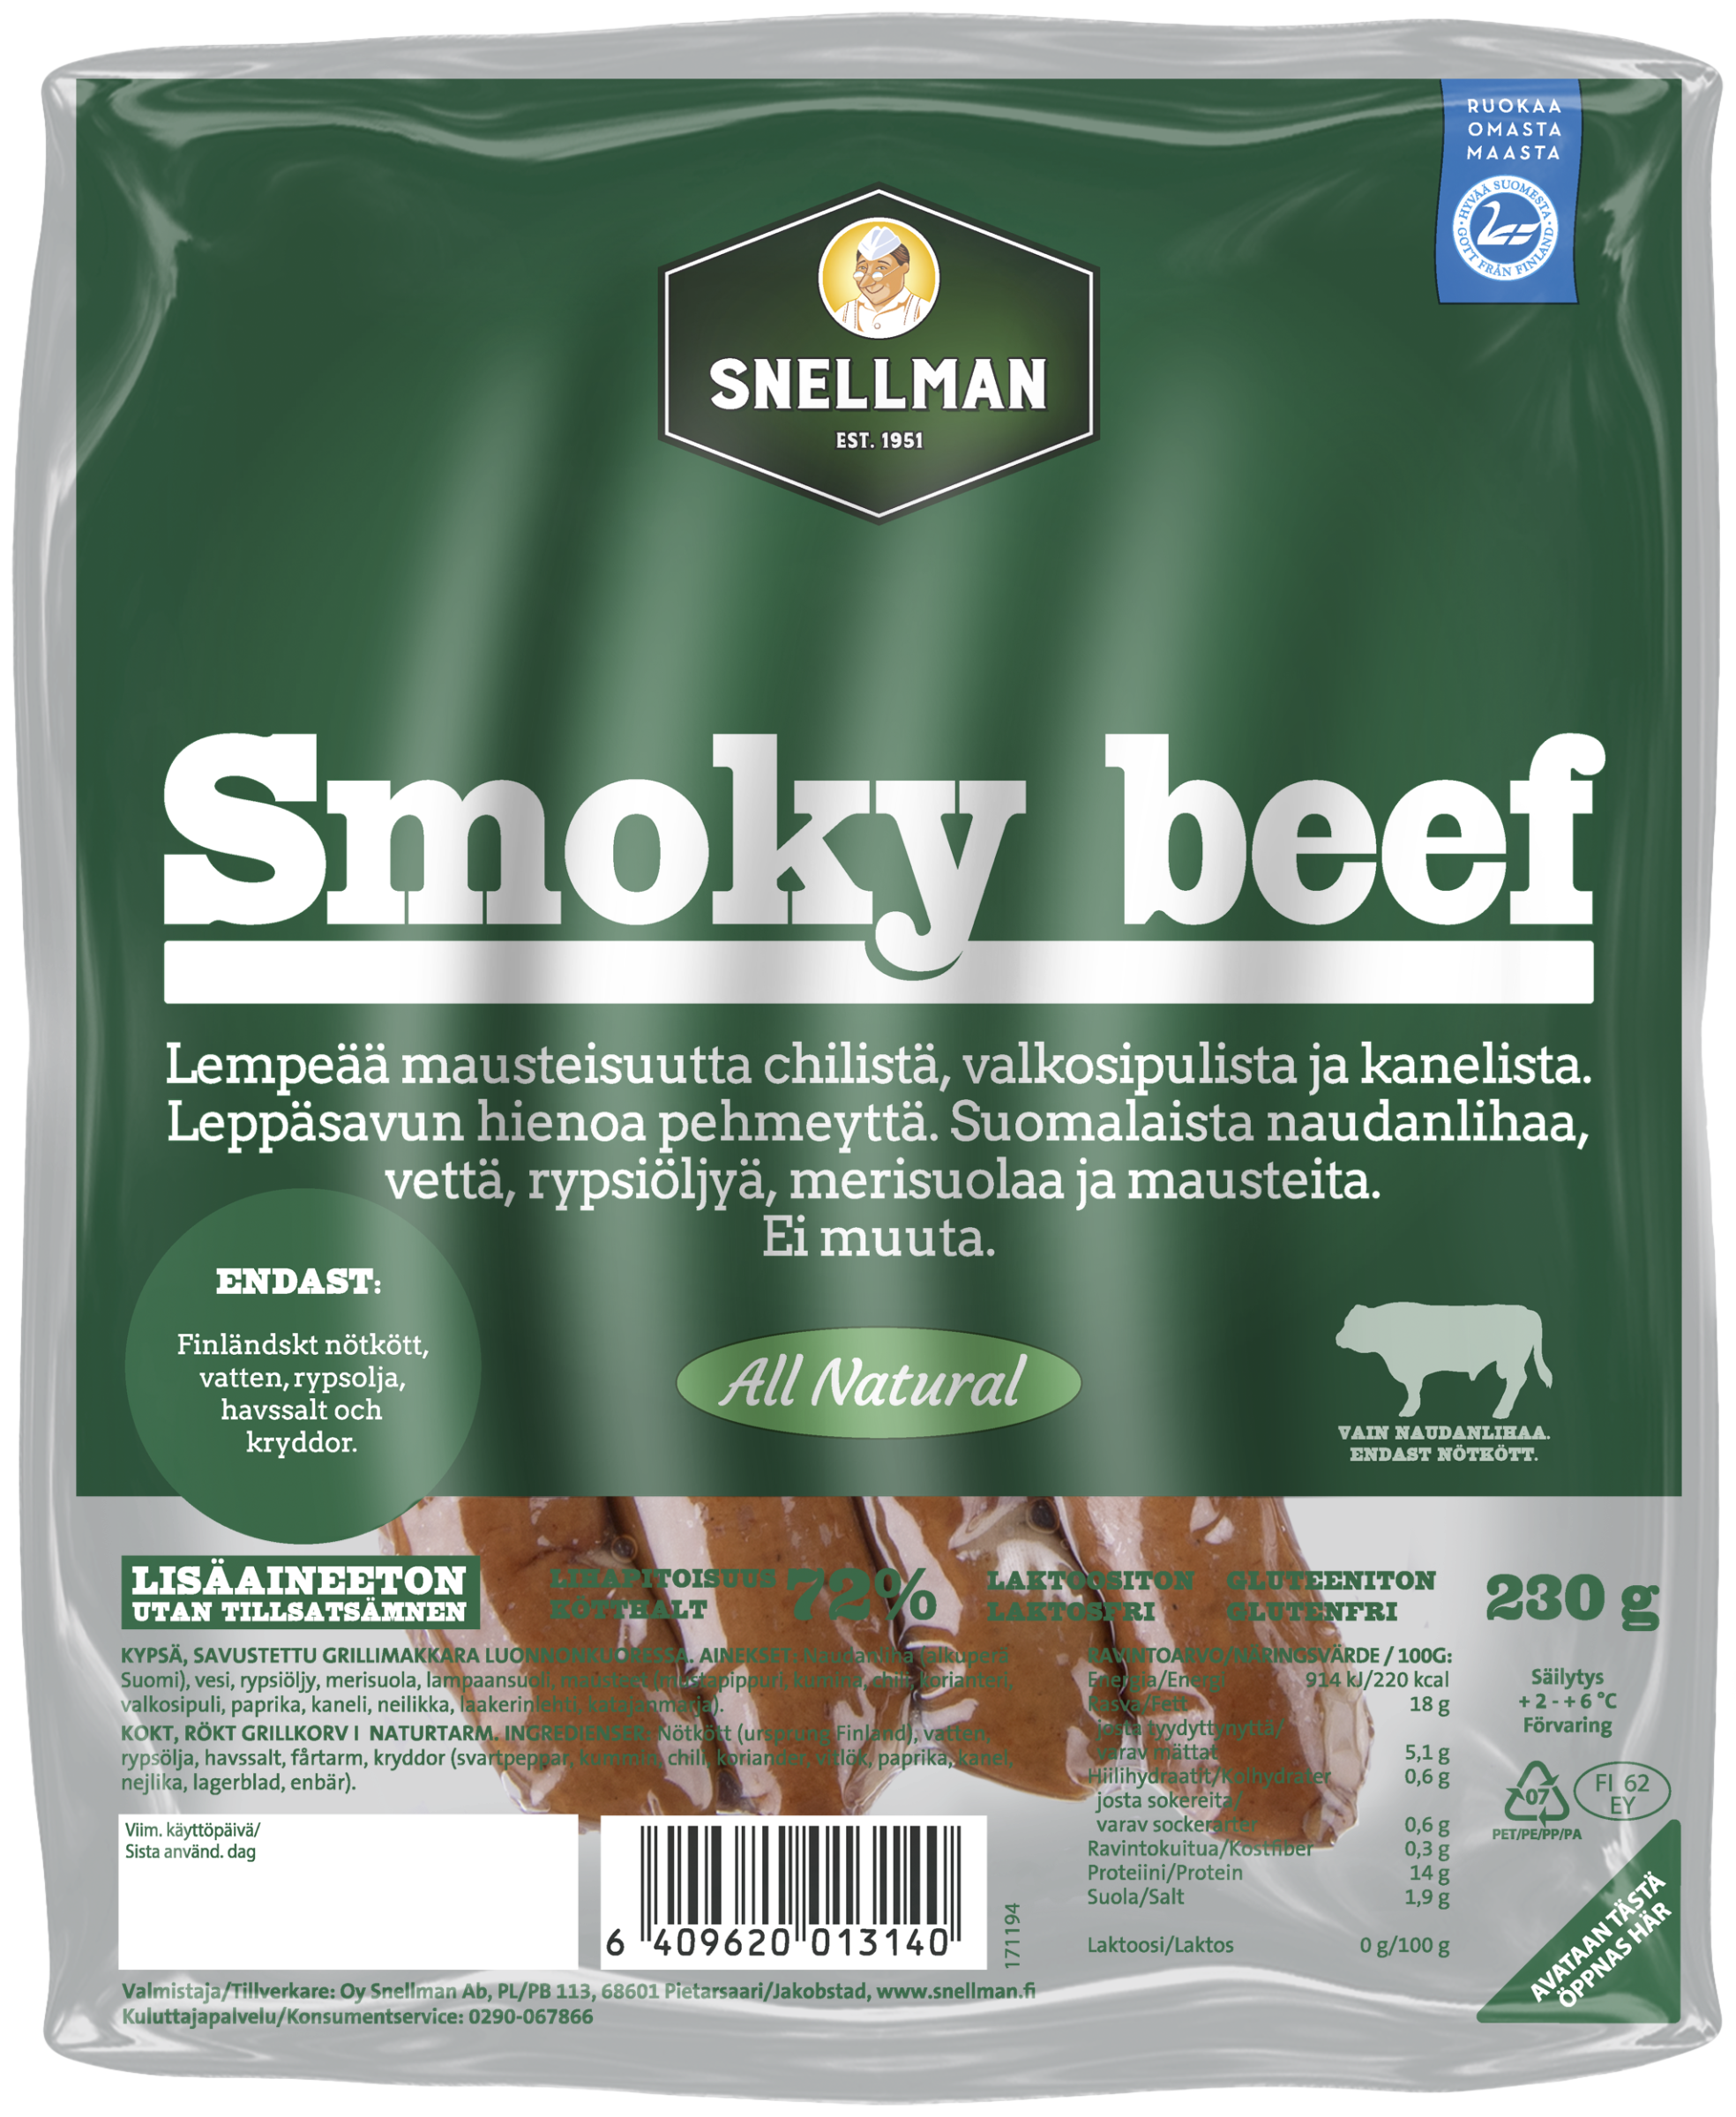 All Natural Smoky Beef 1